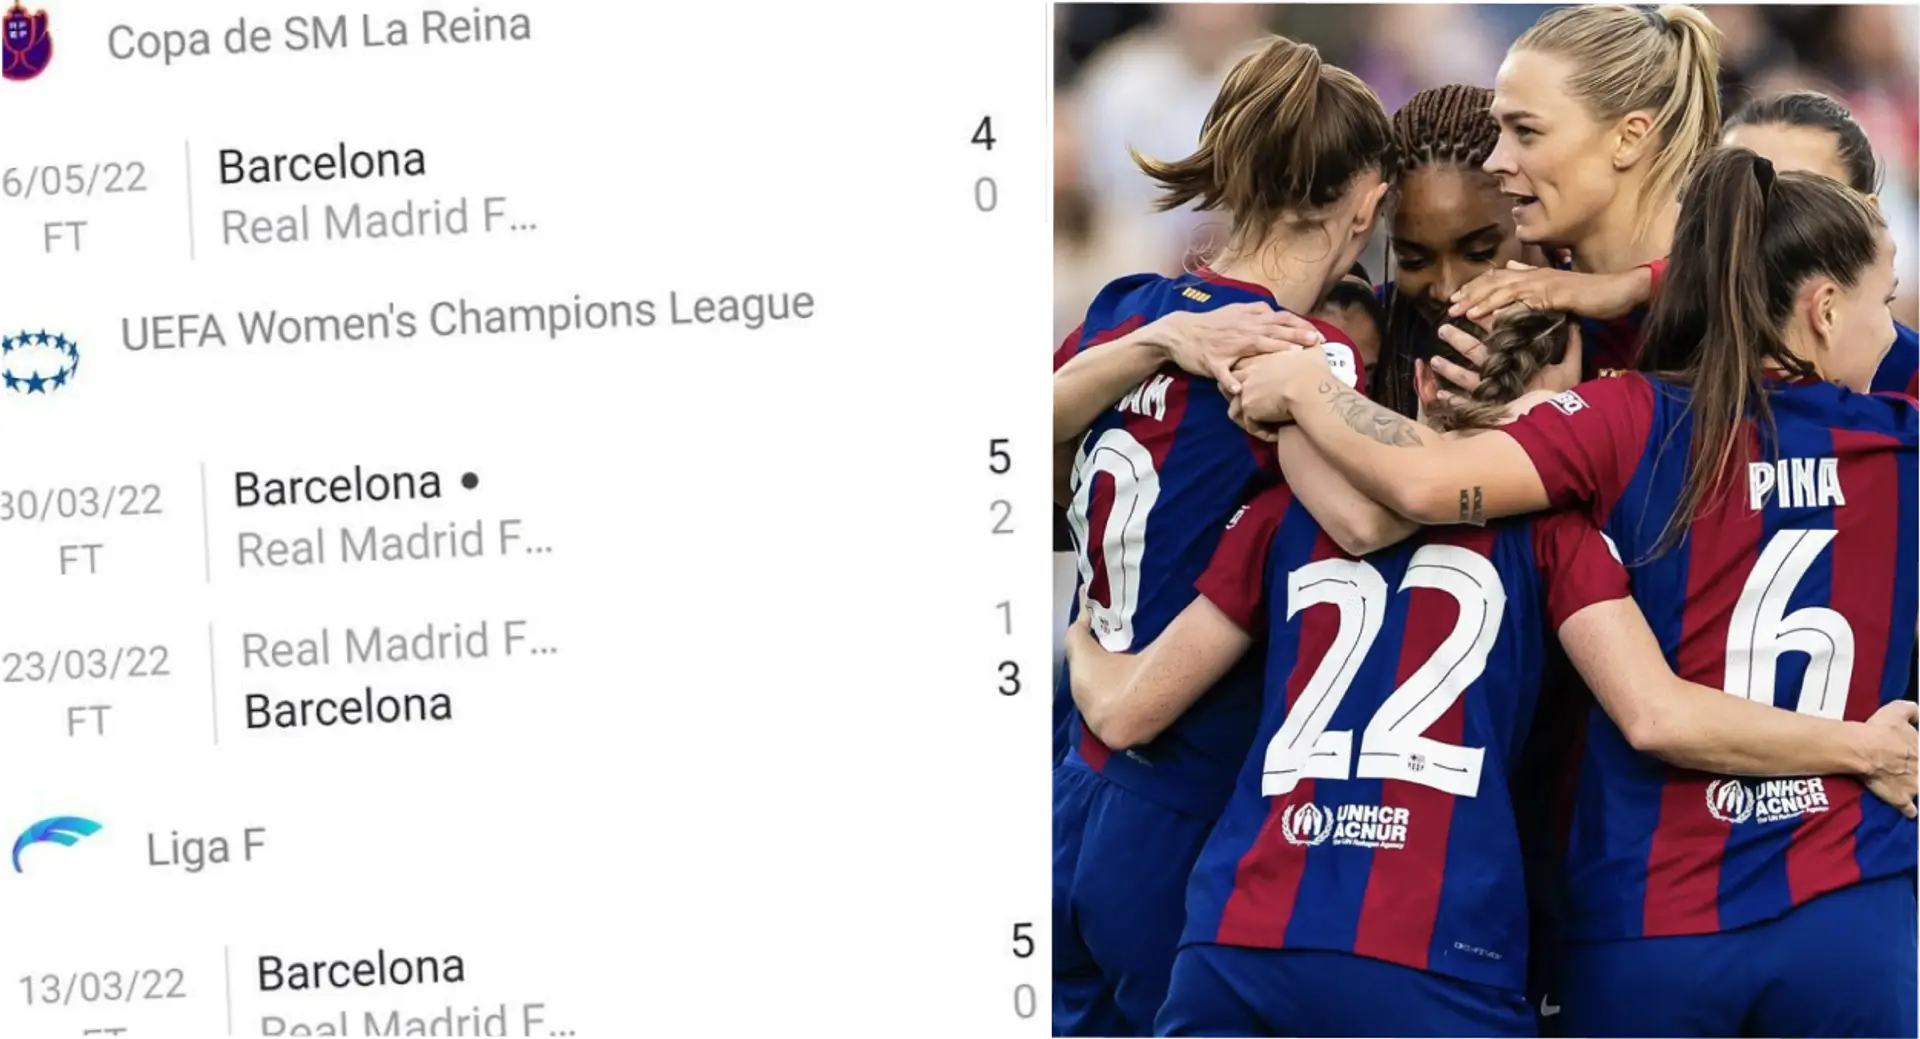 Barca Femeni smash Real Madrid in yet another Clasico – their head-to-head record is WILD